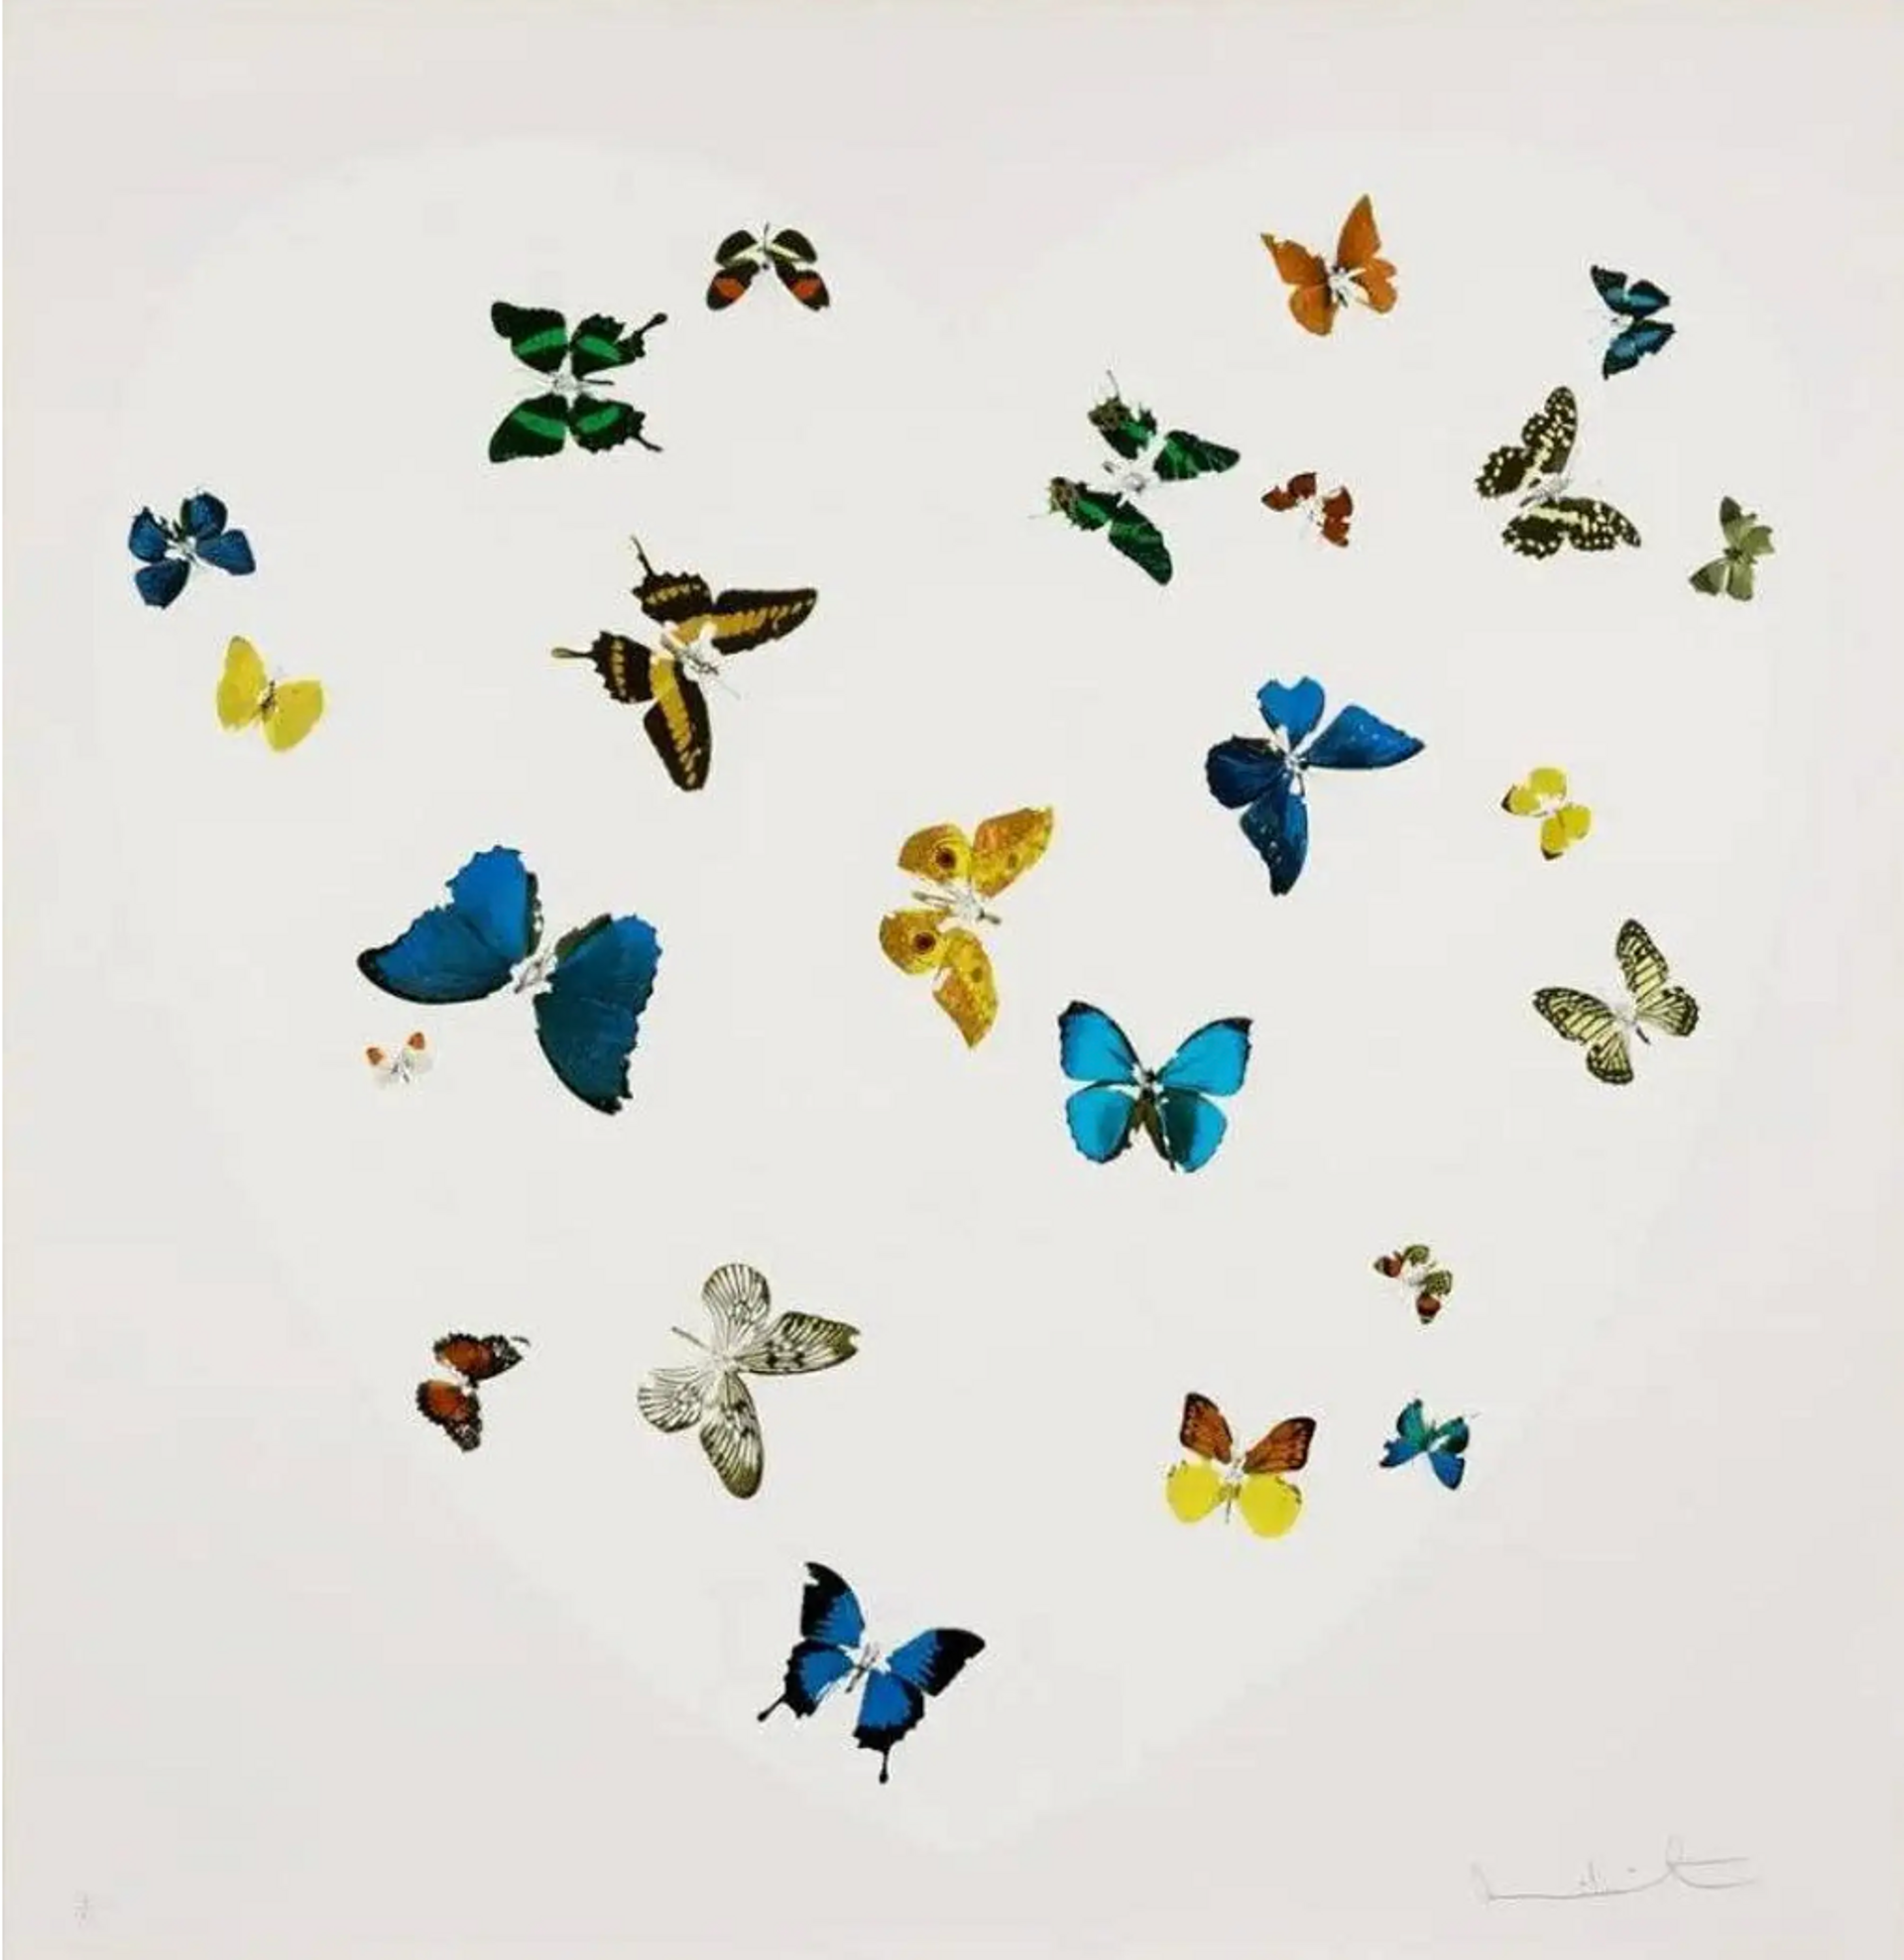 Love Is All You Need by Damien Hirst